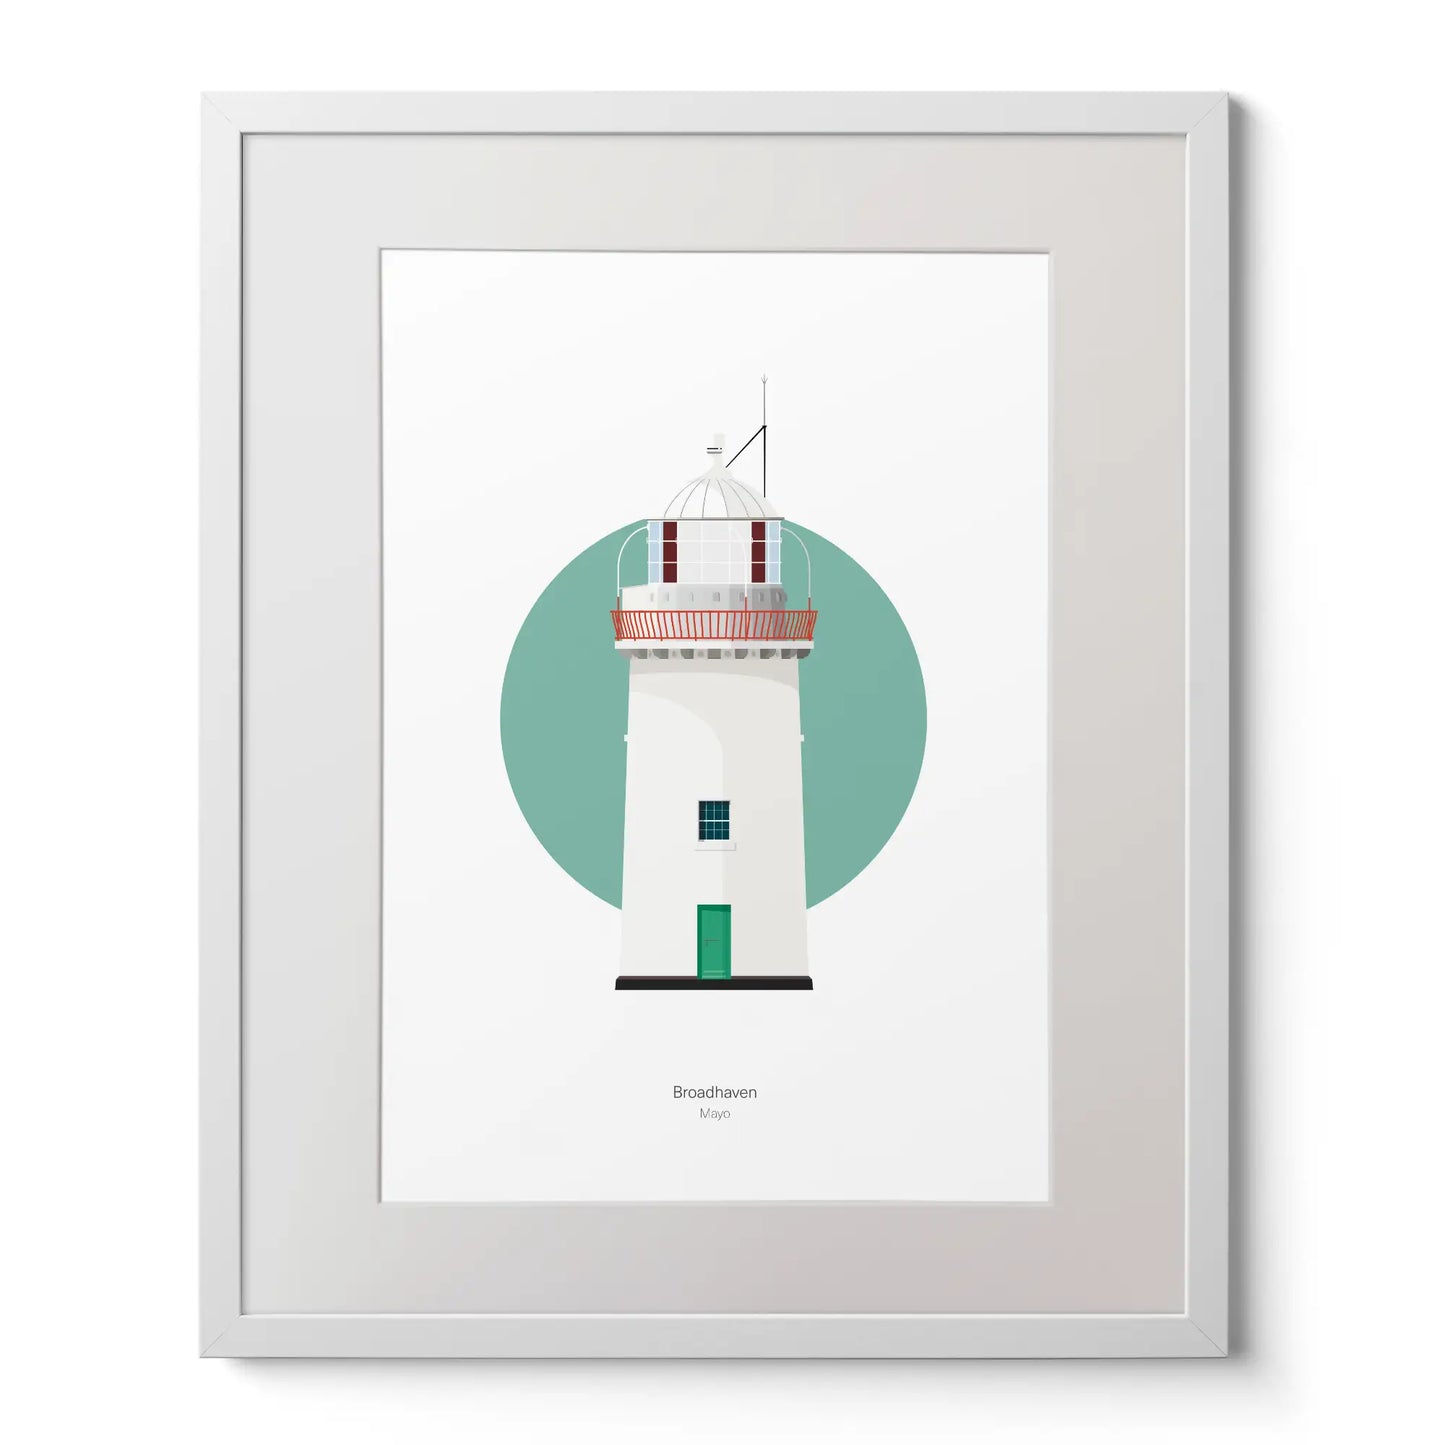 Illustration of Broadhaven lighthouse on a white background inside light blue square,  in a white frame measuring 40x50cm.